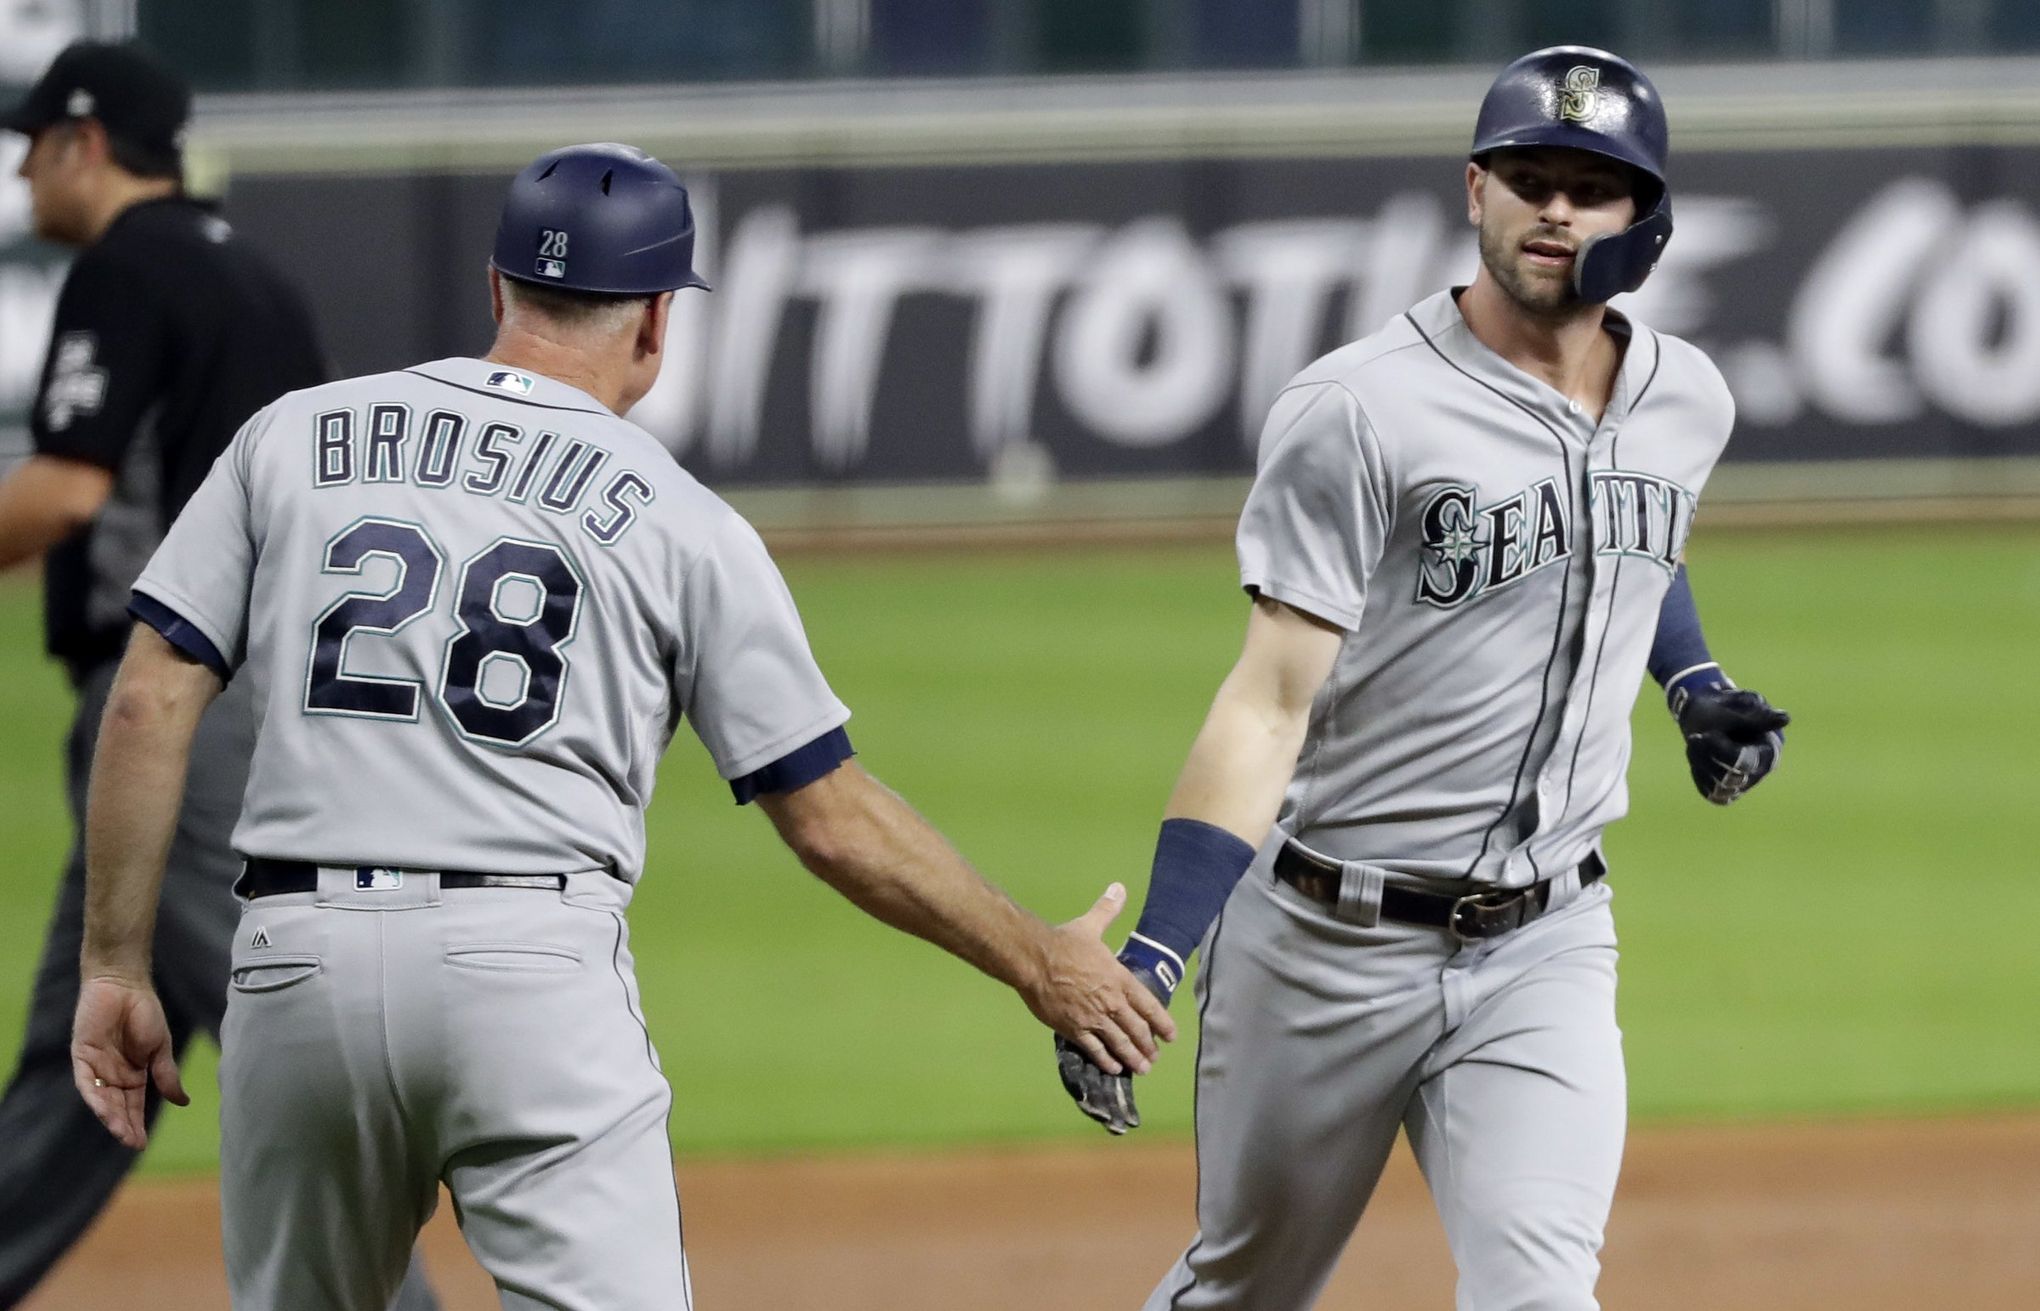 LA Angels: Mariners trade sets up possibility of a Mitch Haniger